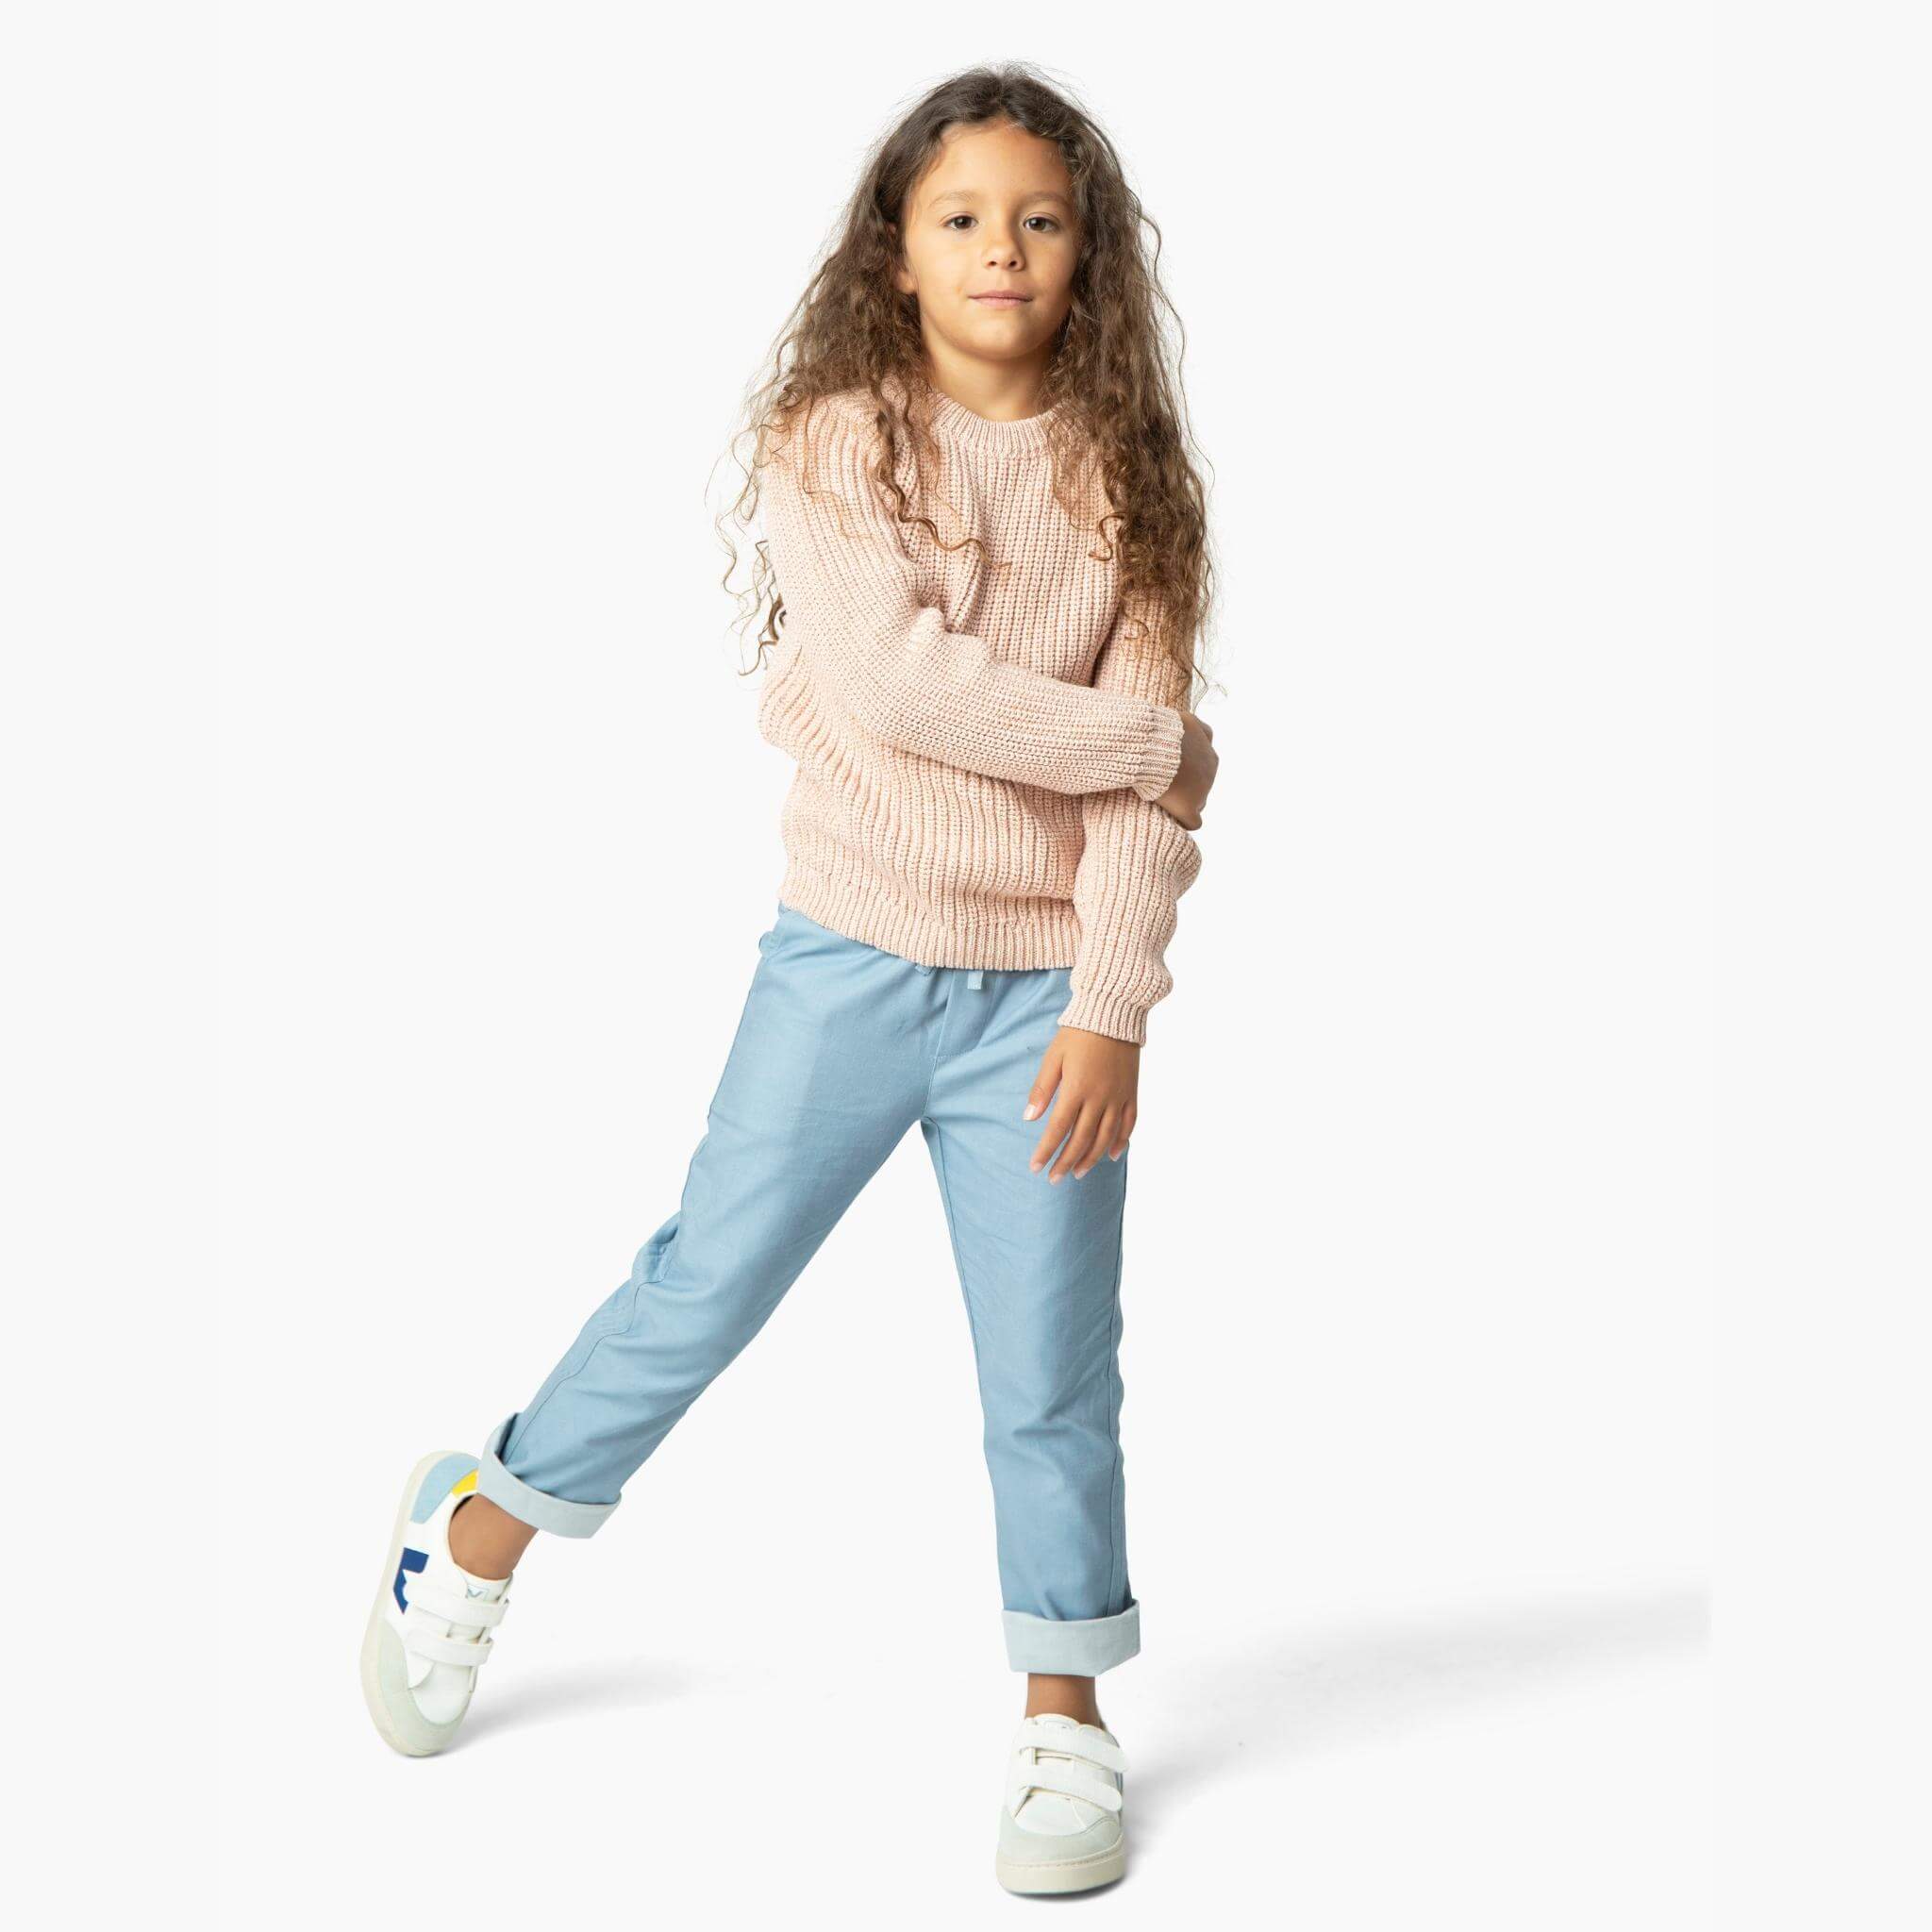 Girl wearing light blue soft denim pants and one of our best selling girls sweaters from our Kids Essentials collection. It is a blush, chunky sweater made of organic Italian cotton yarn.